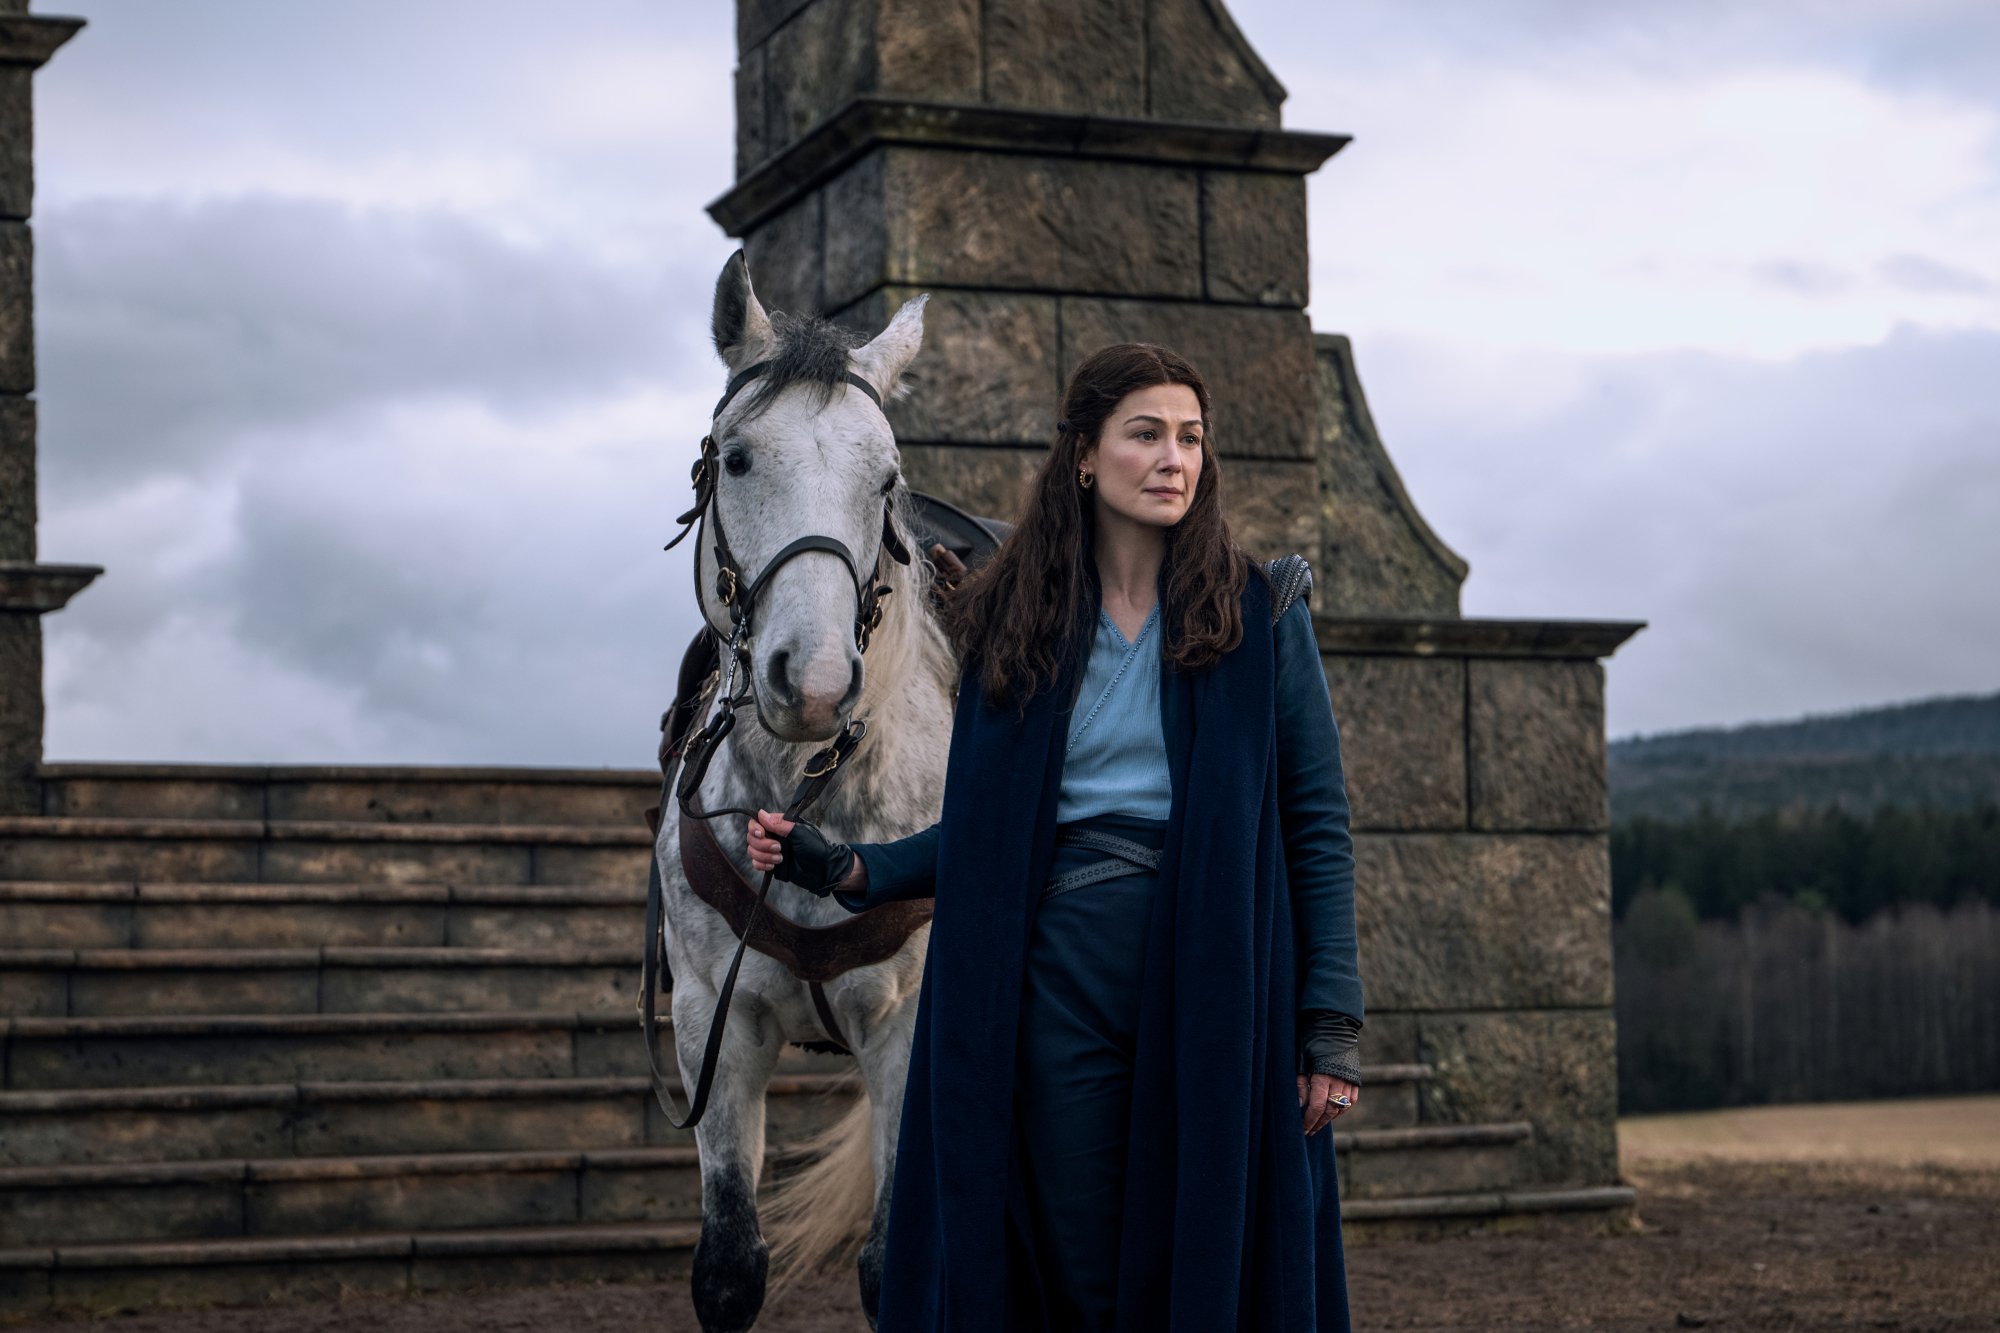 Rosamund Pike as Moiraine Damodred in Prime Video's 'The Wheel of Time' TV series. She's standing with her horse.